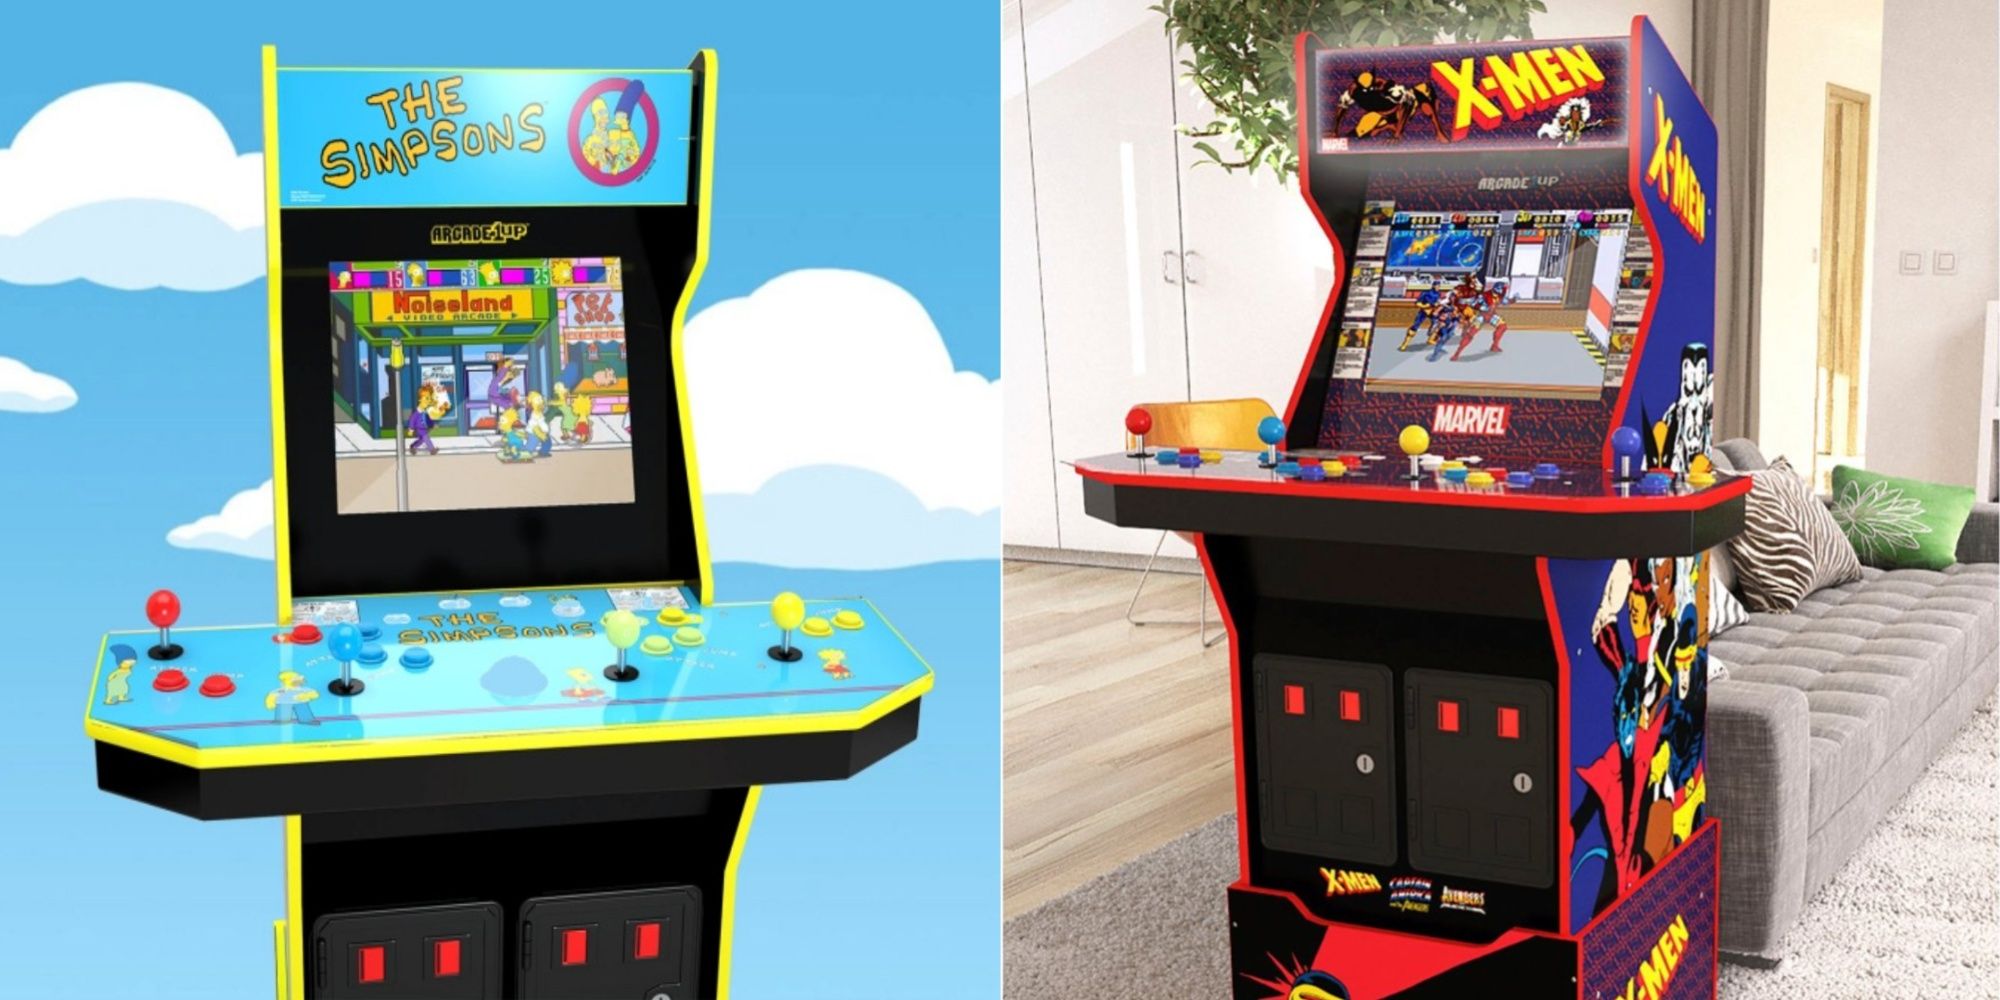 the simpsons and x-men arcade1up cabinets